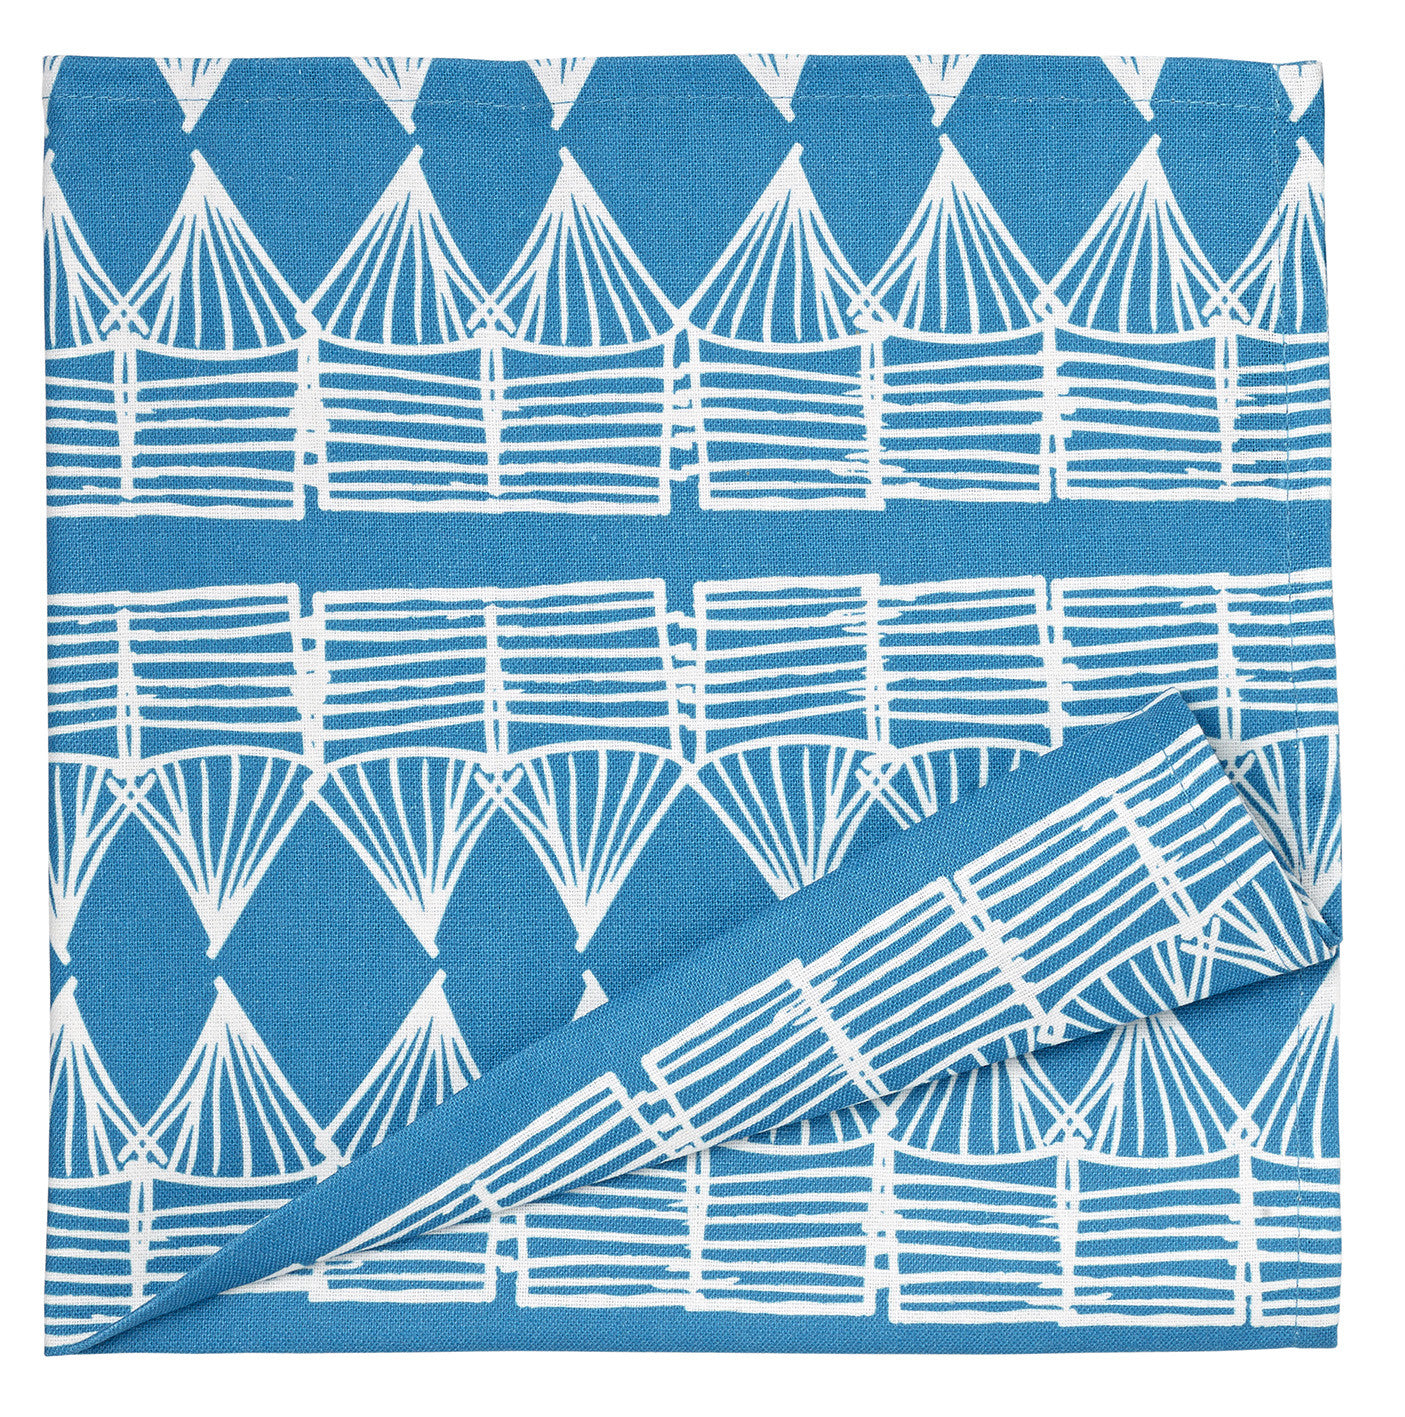 Tiki Huts Patterned Cotton Linen Napkins in Turquoise Blue